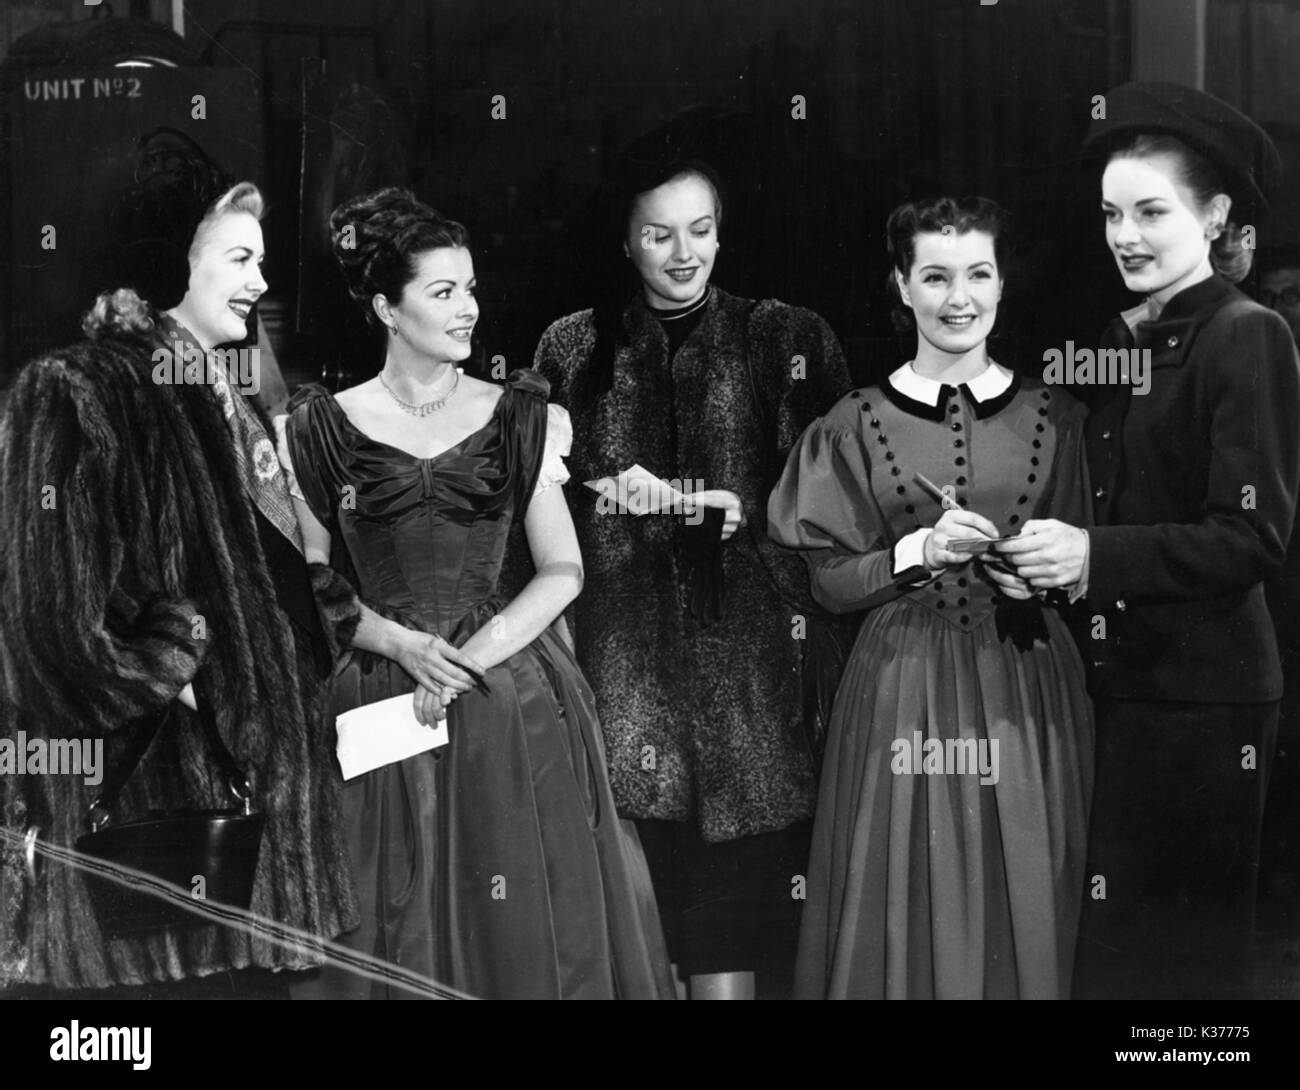 MARGARET LOCKWOOD (SECOND RIGHT) AND PATRICIA ROC (4TH RIGHT) BEING VISITED BY THE GOLDWYN GIRLS AT SHEPHERD'S BUSH STUDIOS IN 1947  PHOTO BY JOHN JAY Stock Photo